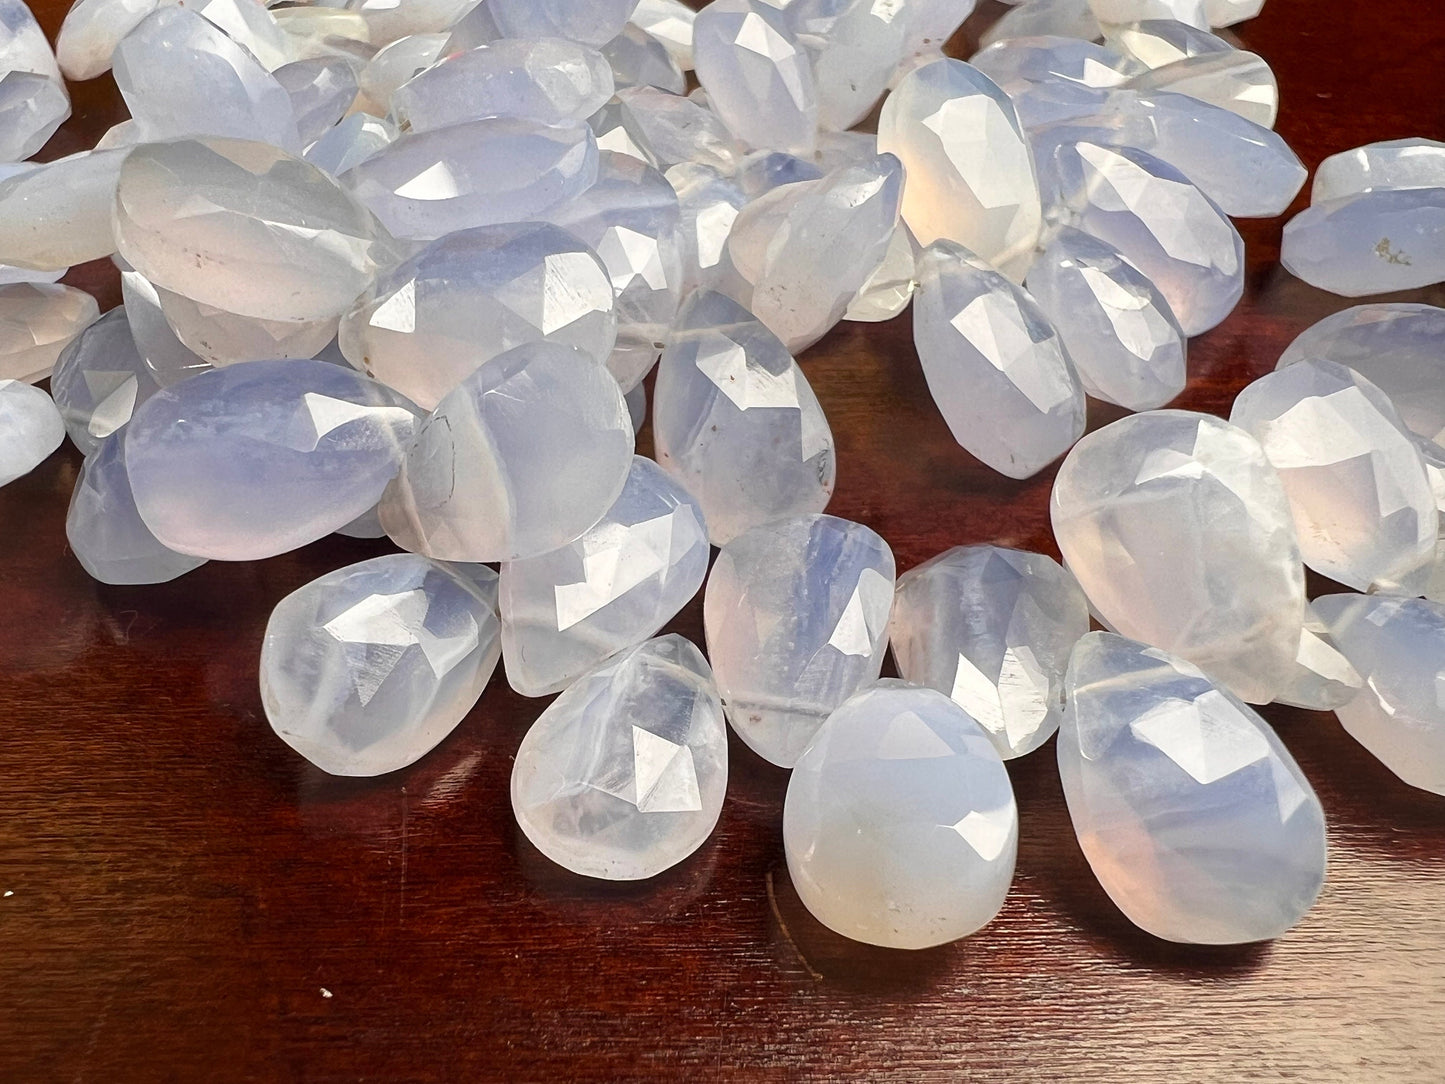 Natural Sky Blue Chalcedony Briolette Faceted 9x15mm large Drop Jewelry Making Gemstone beads 4pcs, 10cs, 20 pcs